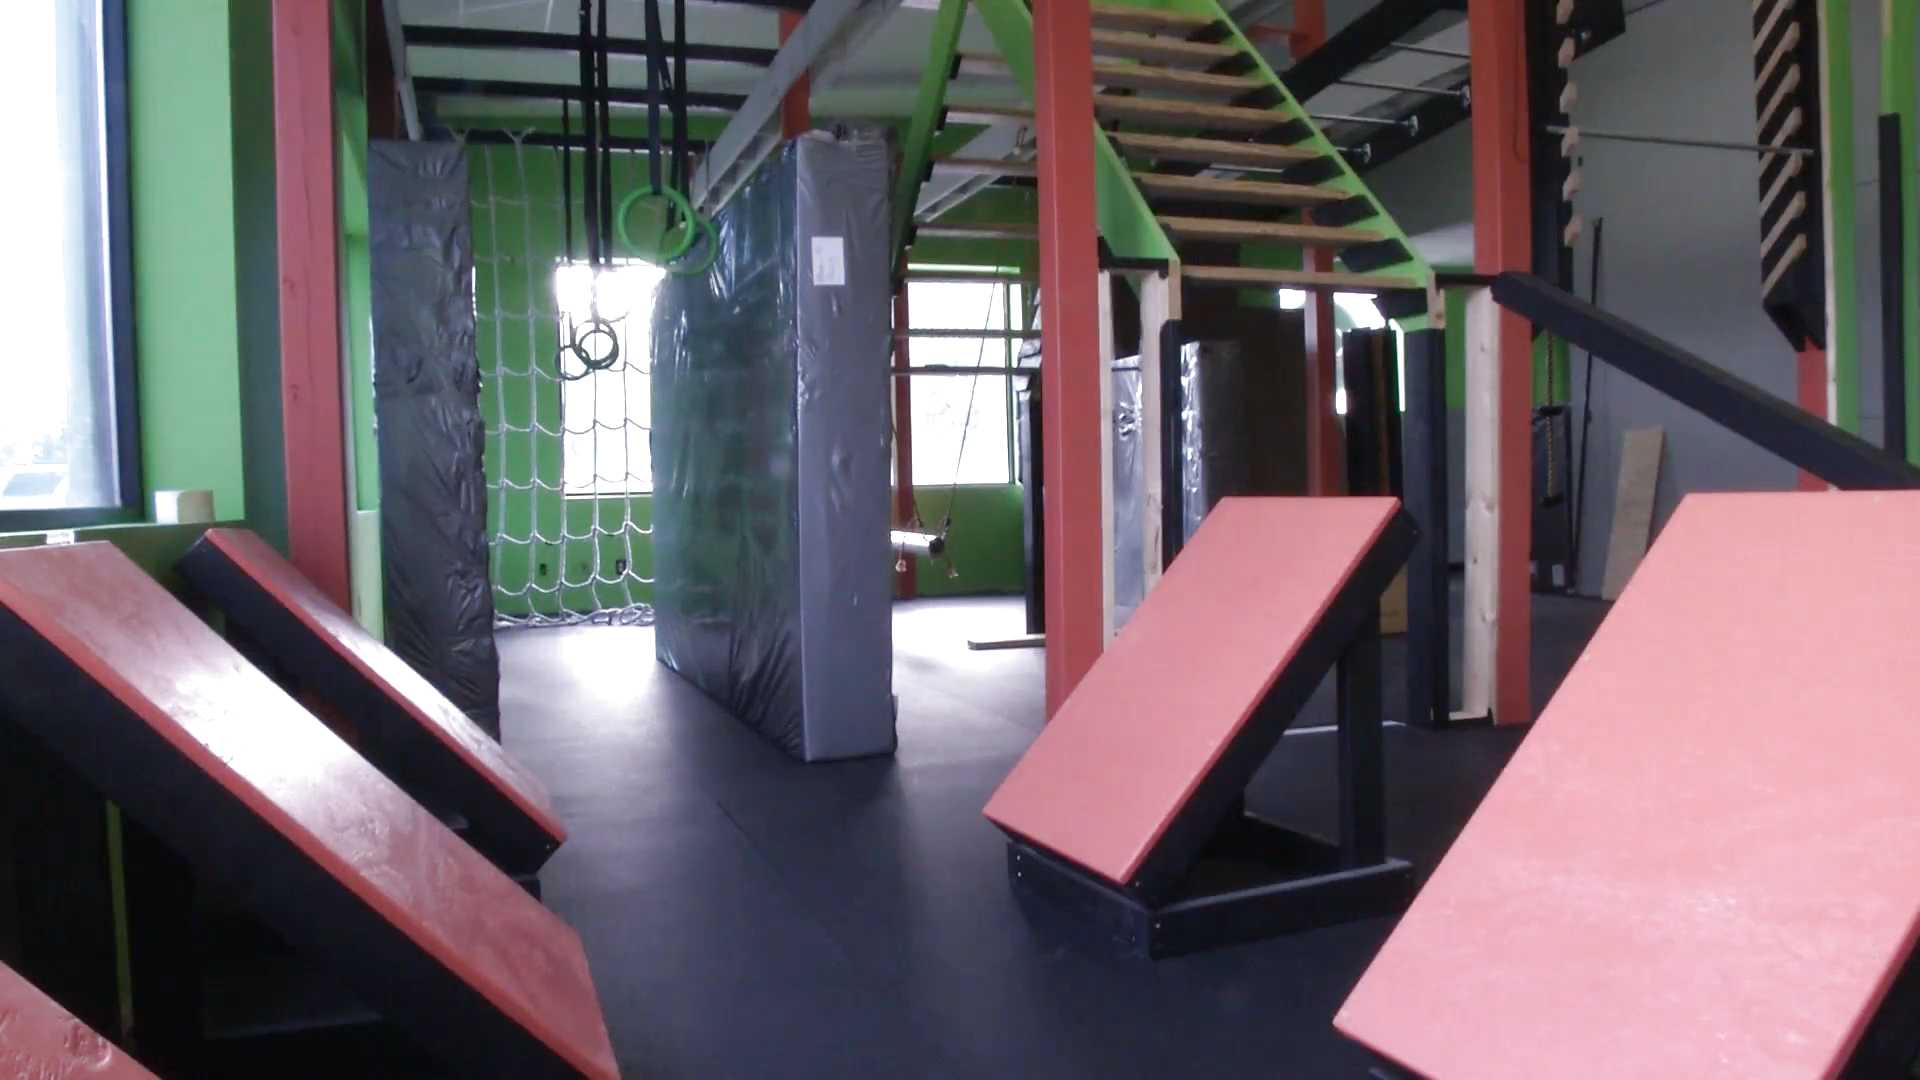 Ninja Warriors and parkour athletes are training in St. Charles - Lindenlink